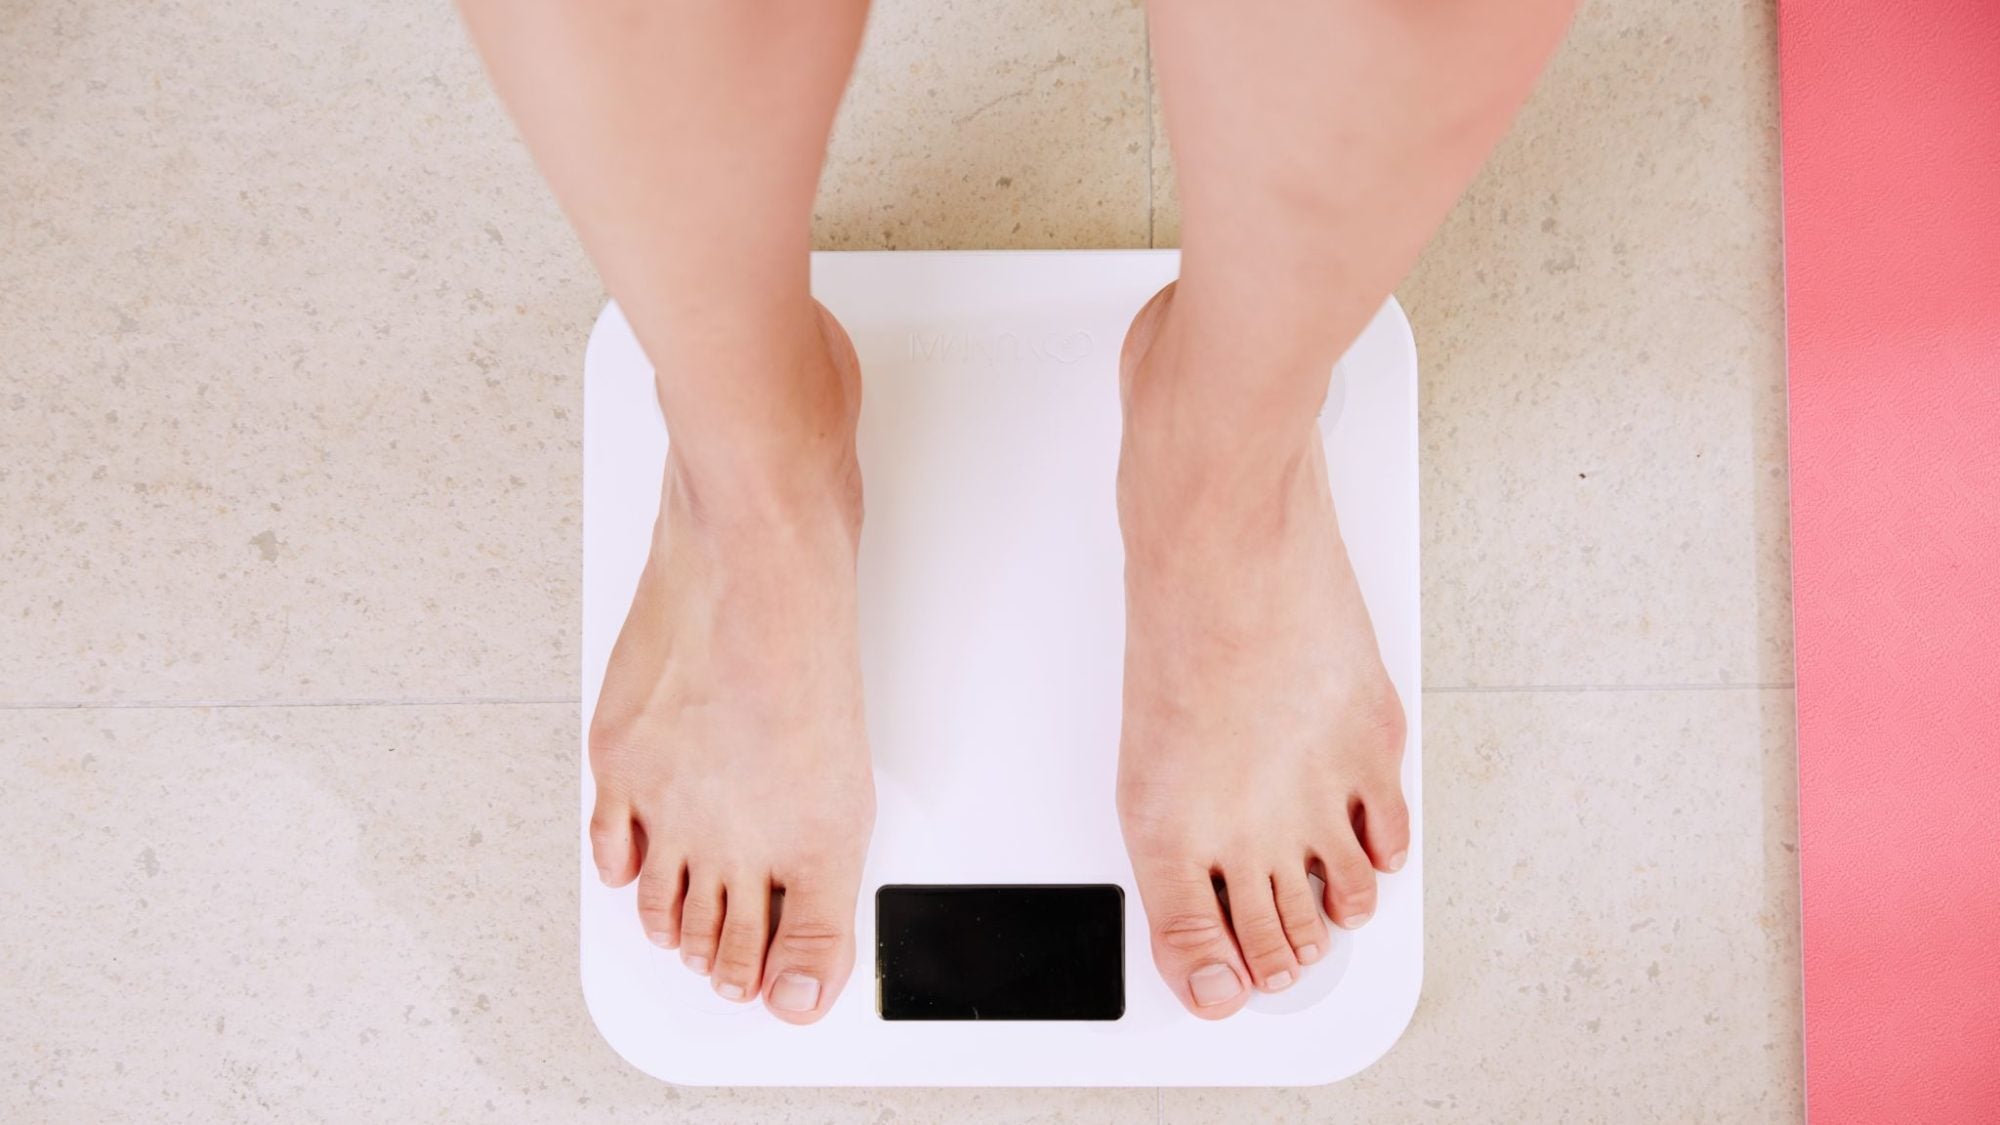 Keto Plateau: Conquering Weight Loss Stalls on Low-Carb Diets